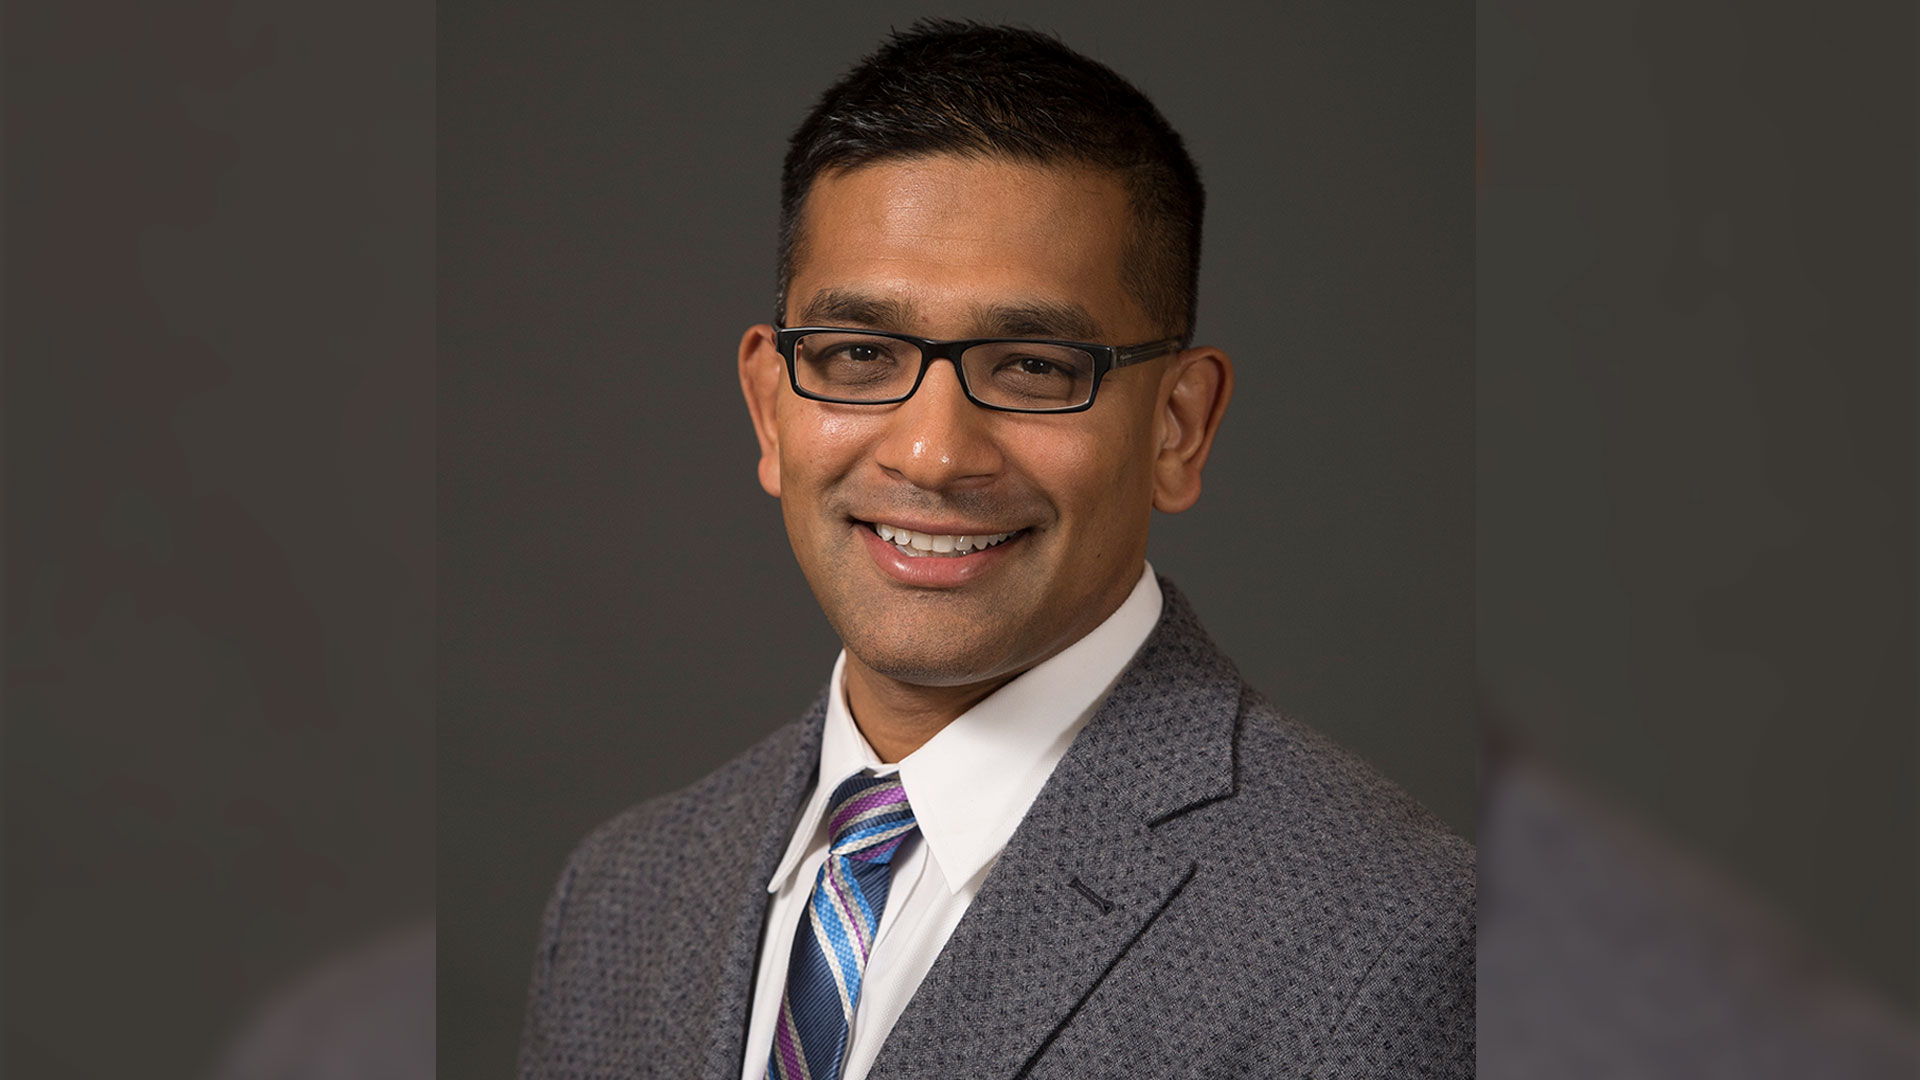 Dr. Amit Garg, Associate Dean, Clinical Research at Schulich School of Medicine & Dentistry.